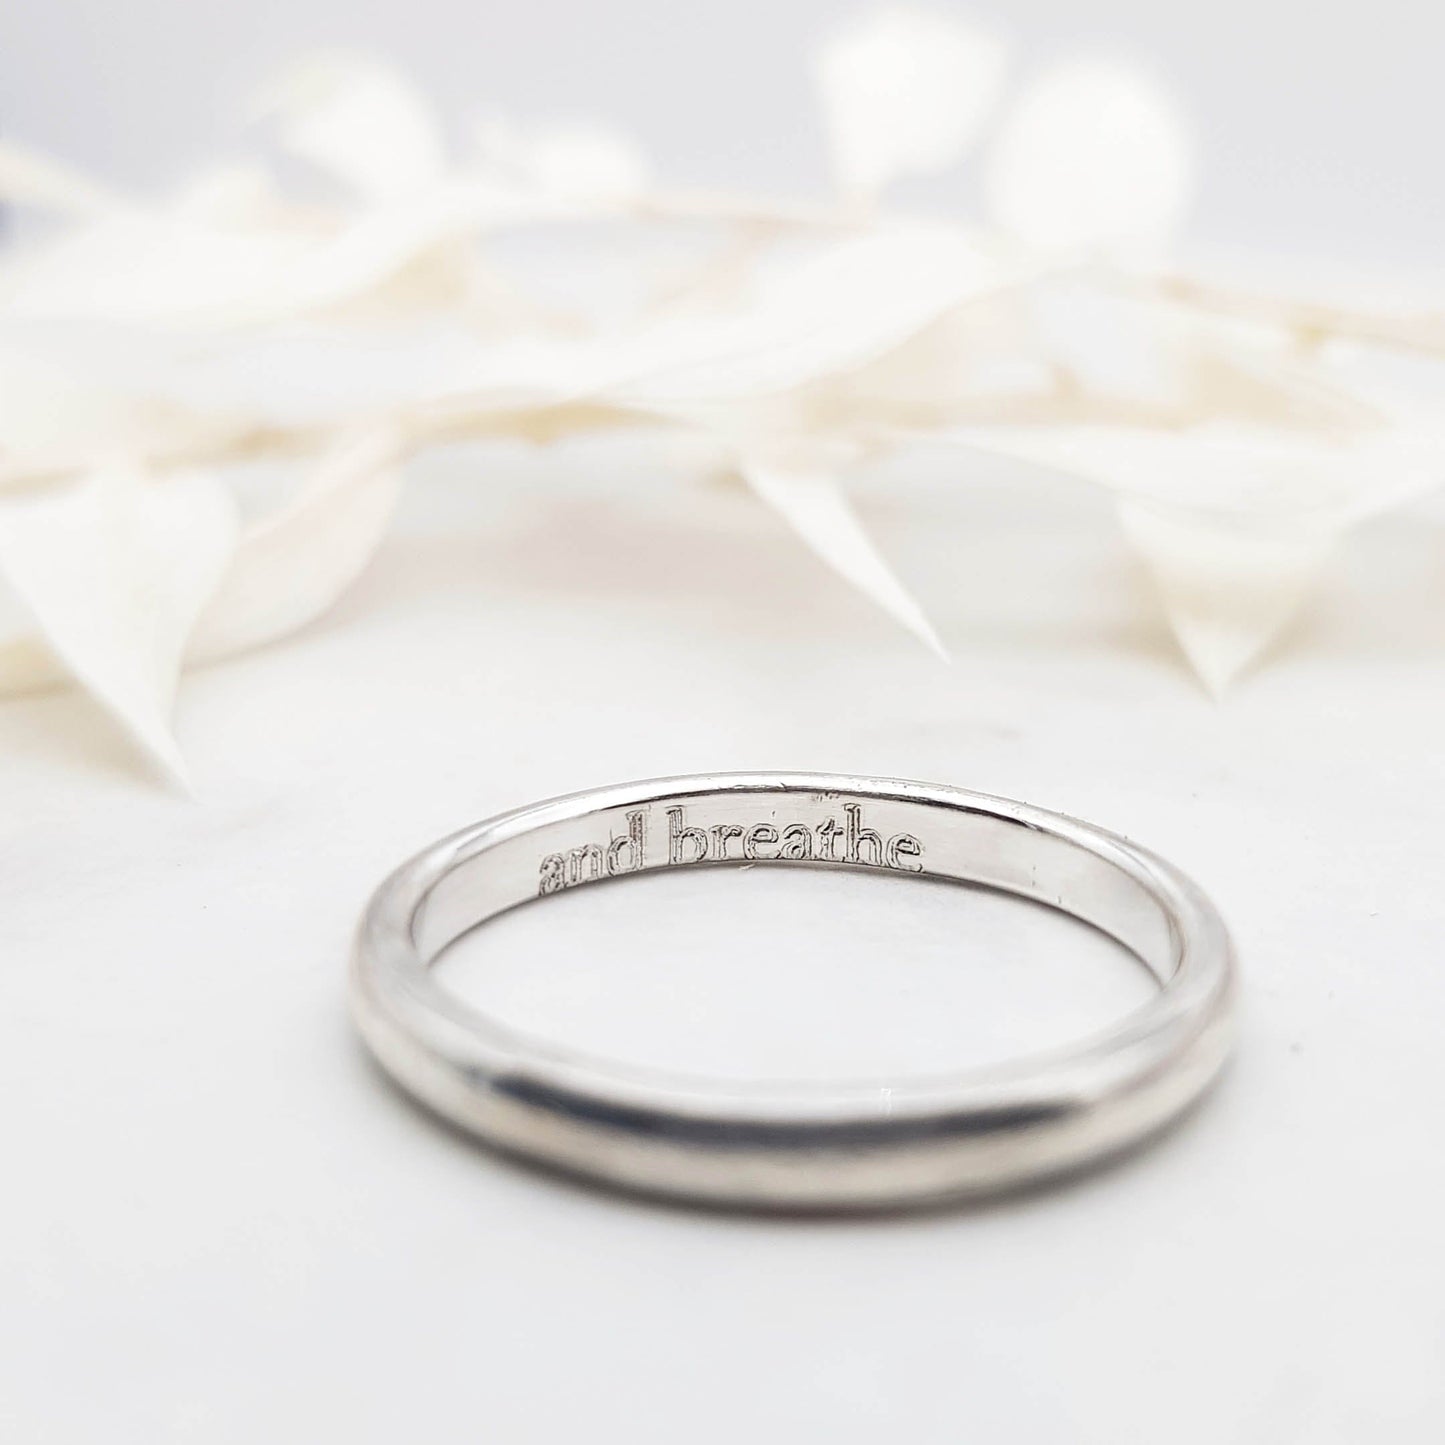 Becky Pearce Designs Simple band